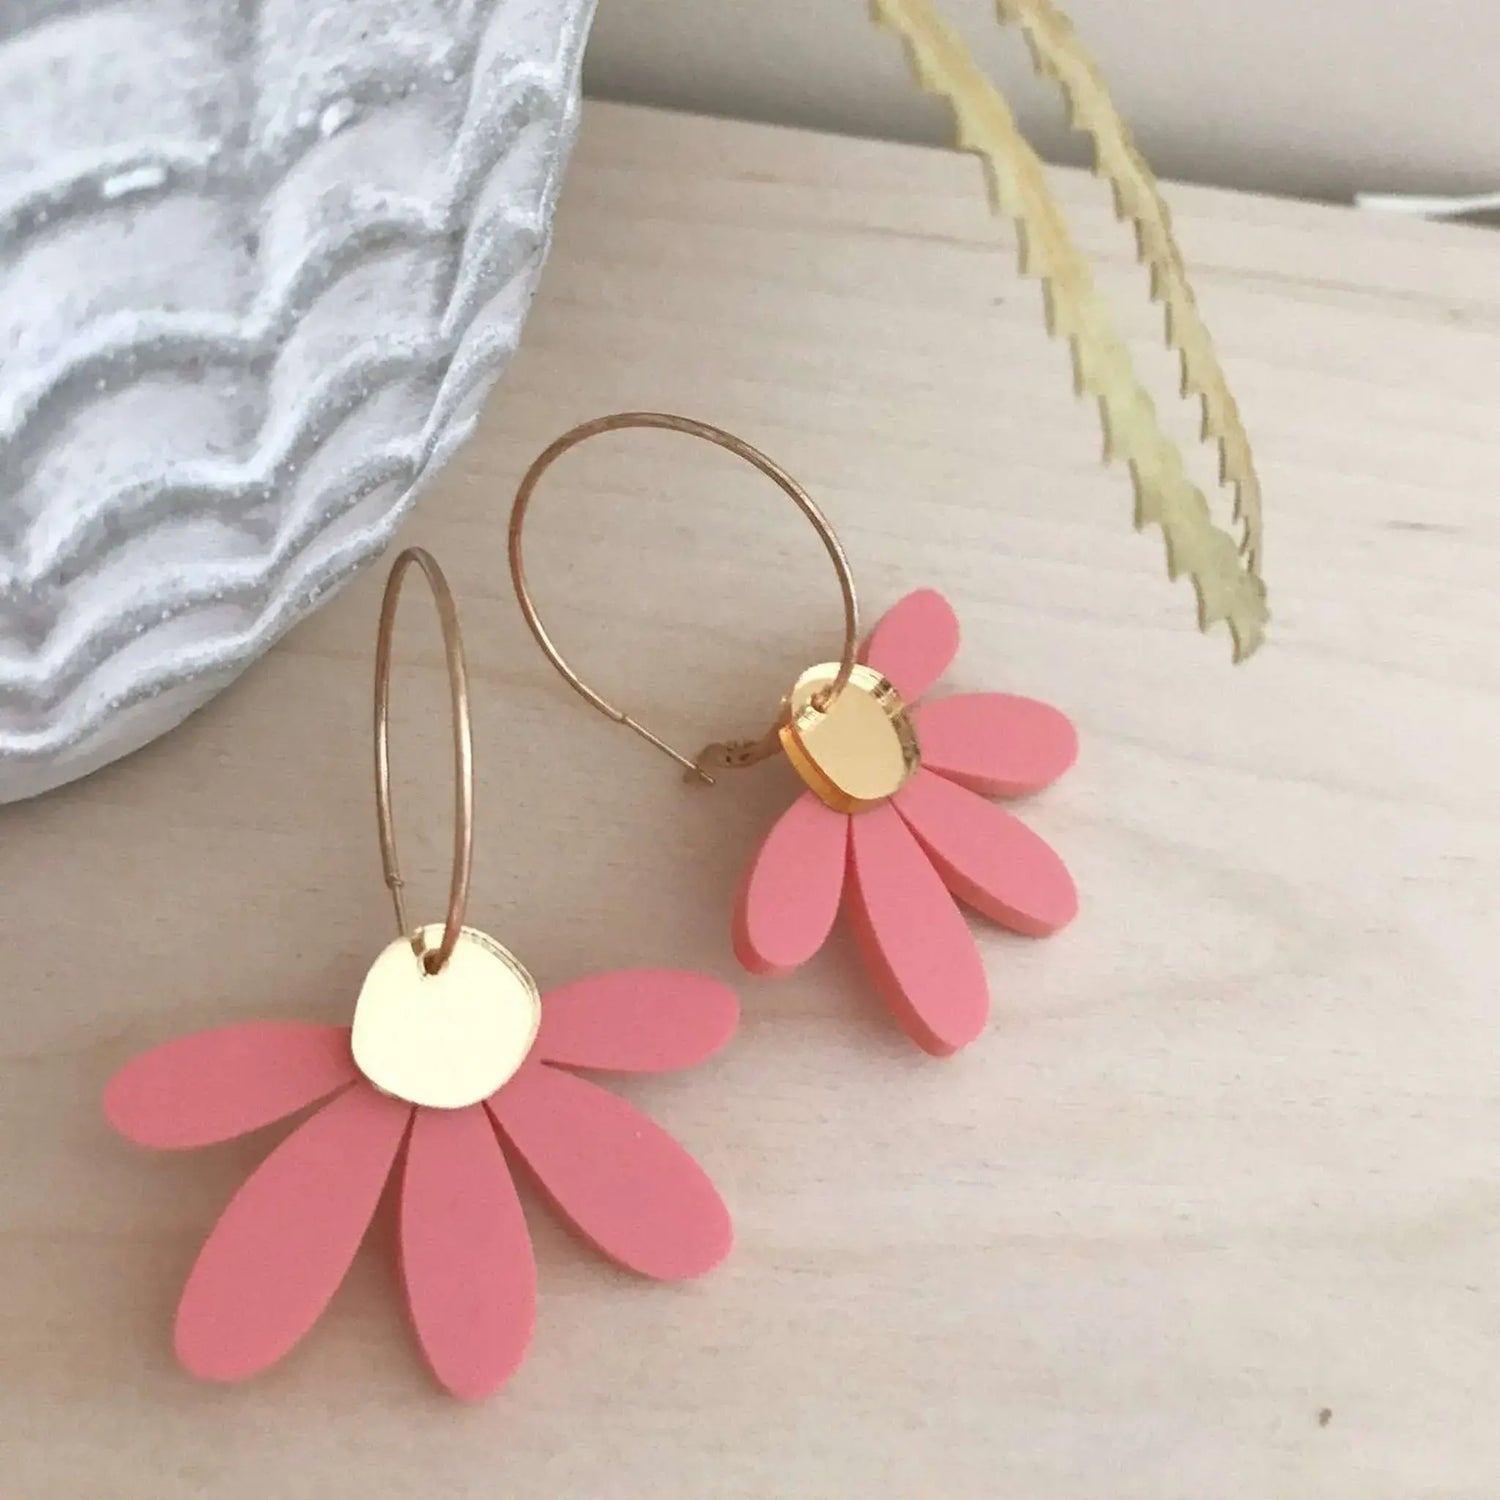 Jumbo Daisy Hoop Earrings in Pastel Raspberry &amp; Gold by Foxie Collective